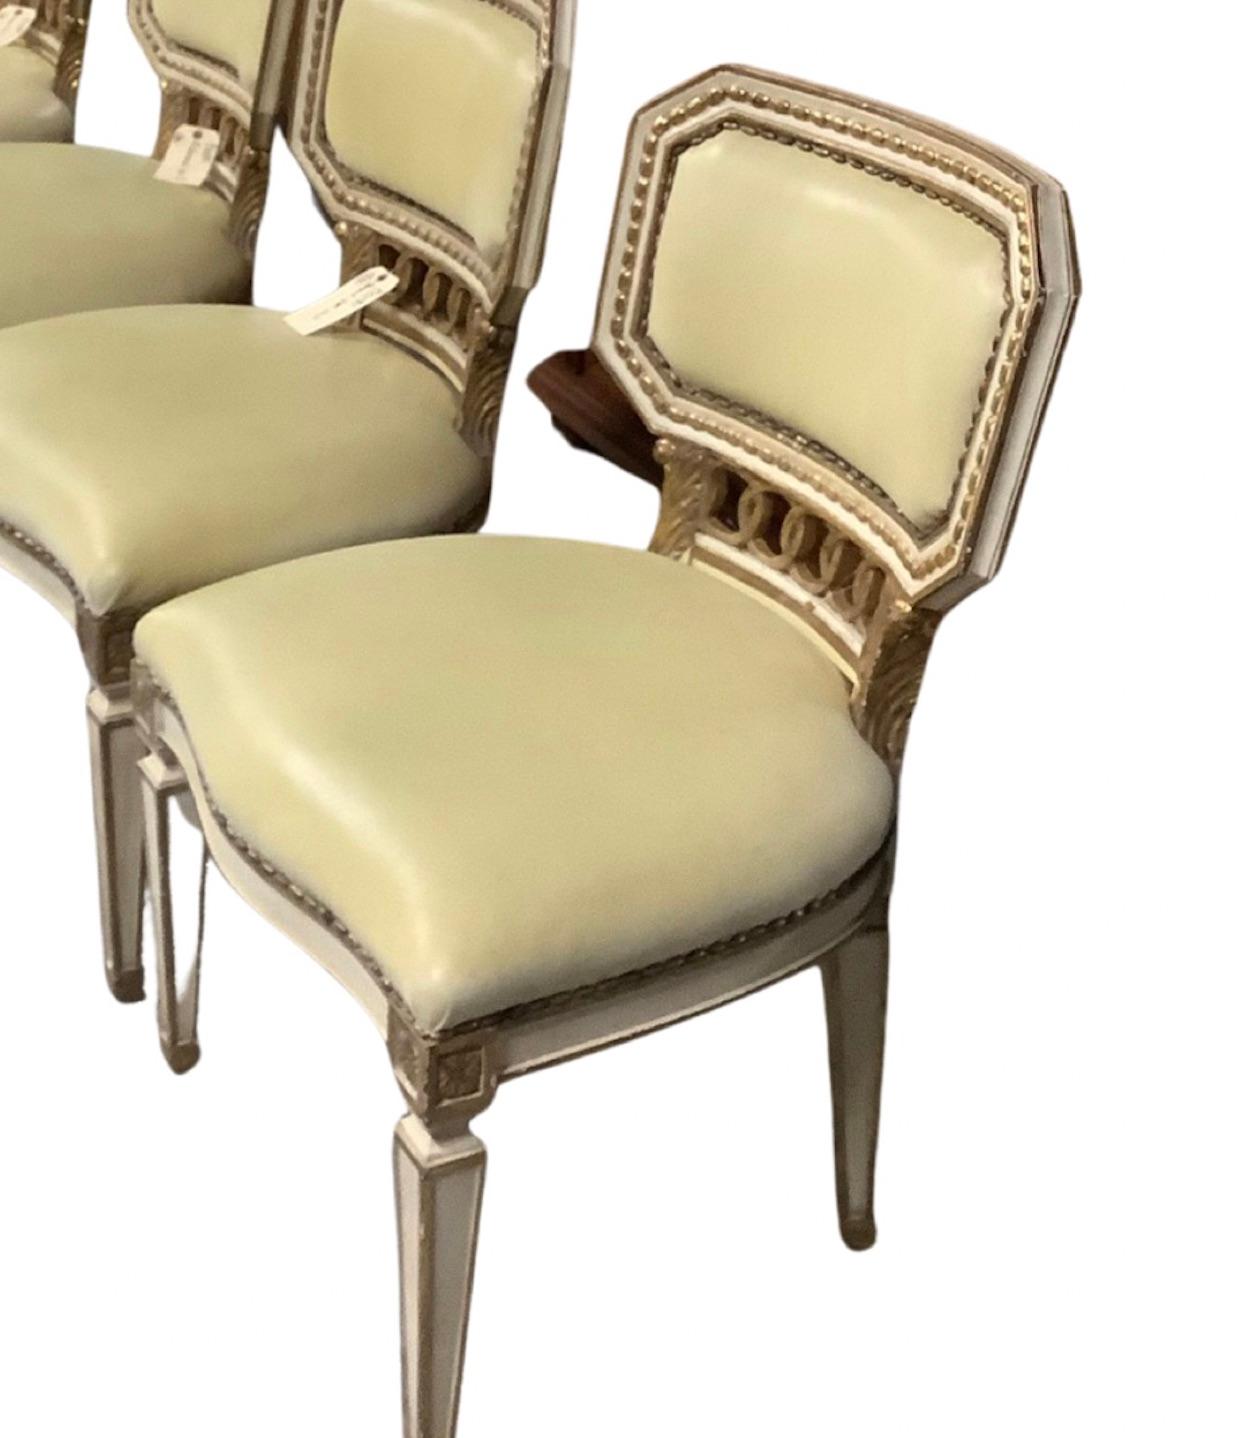 Set of Louis XVI Style Dining Chairs (12) 

Painted Dining Chairs with Gilt roping detail, pale buttery leather and nail heads/Wear consistent with age and use

36